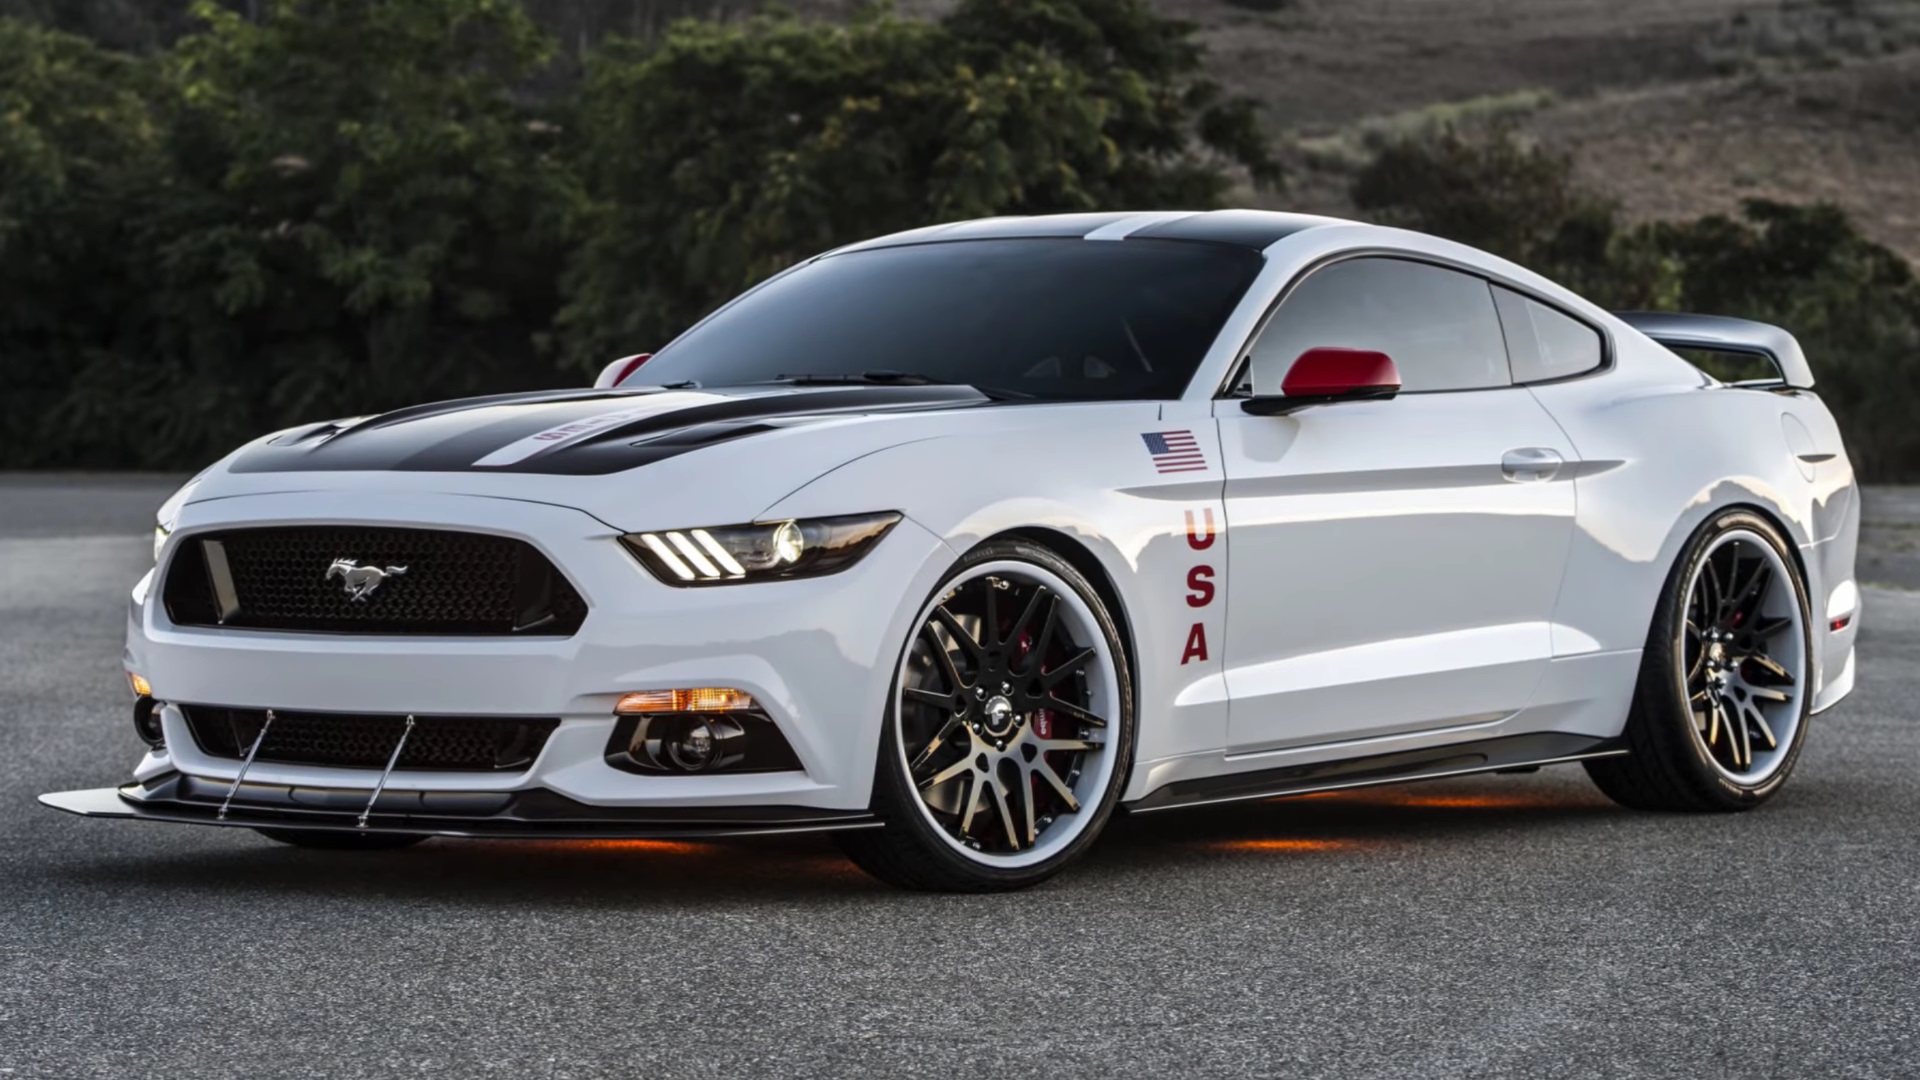 Video: 2015 Ford Mustang GT Apollo Edition